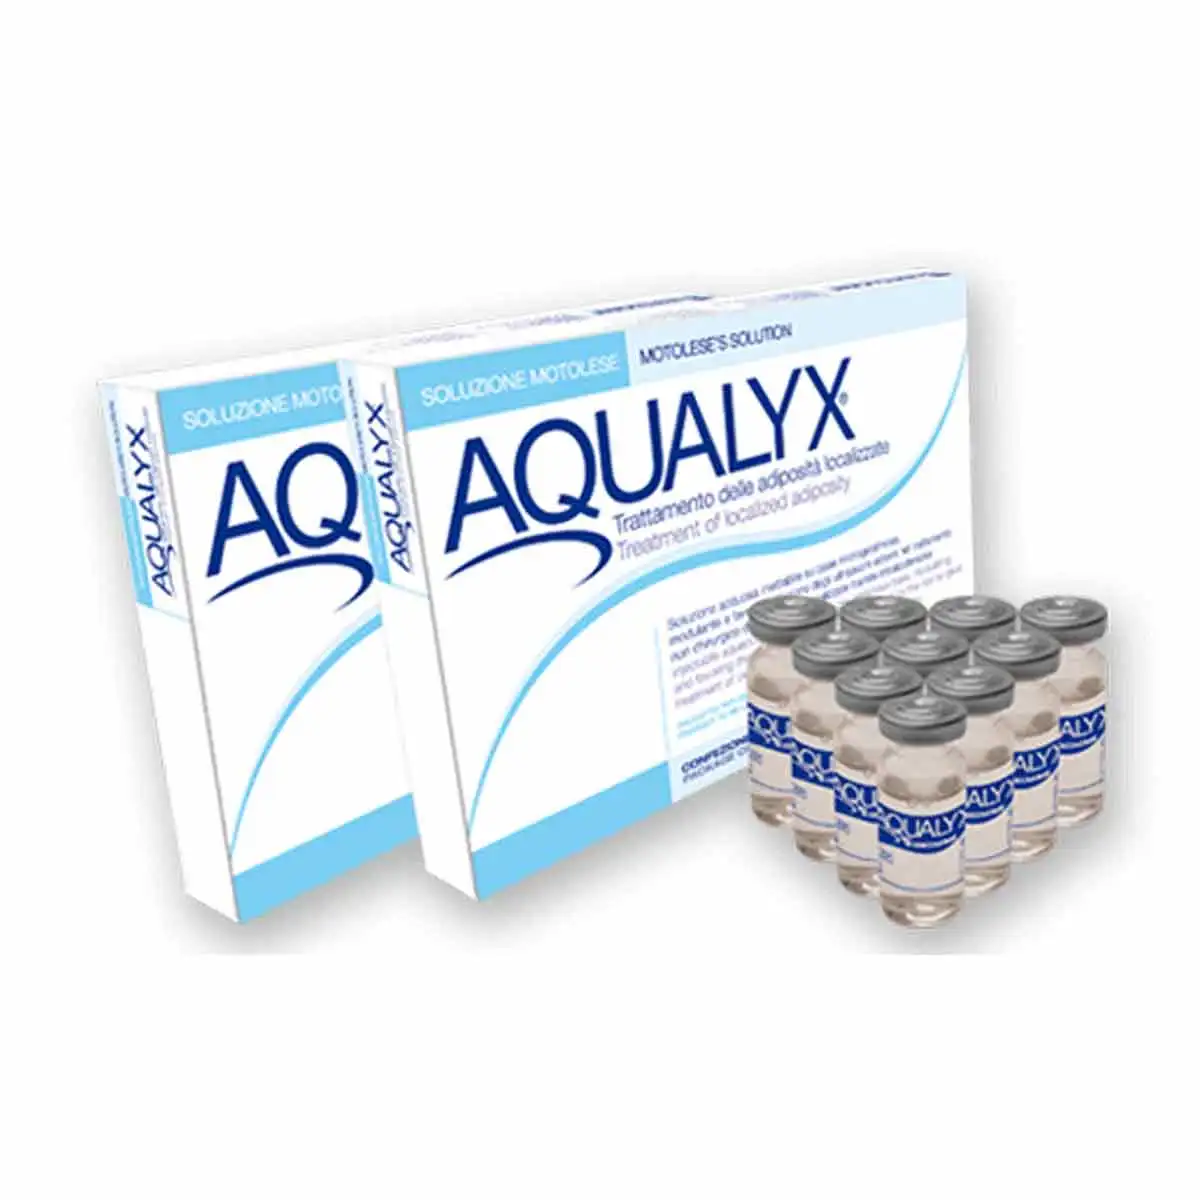 

AQUALYX slimming lipolytic solution injection fat dissolving injections, Transparent